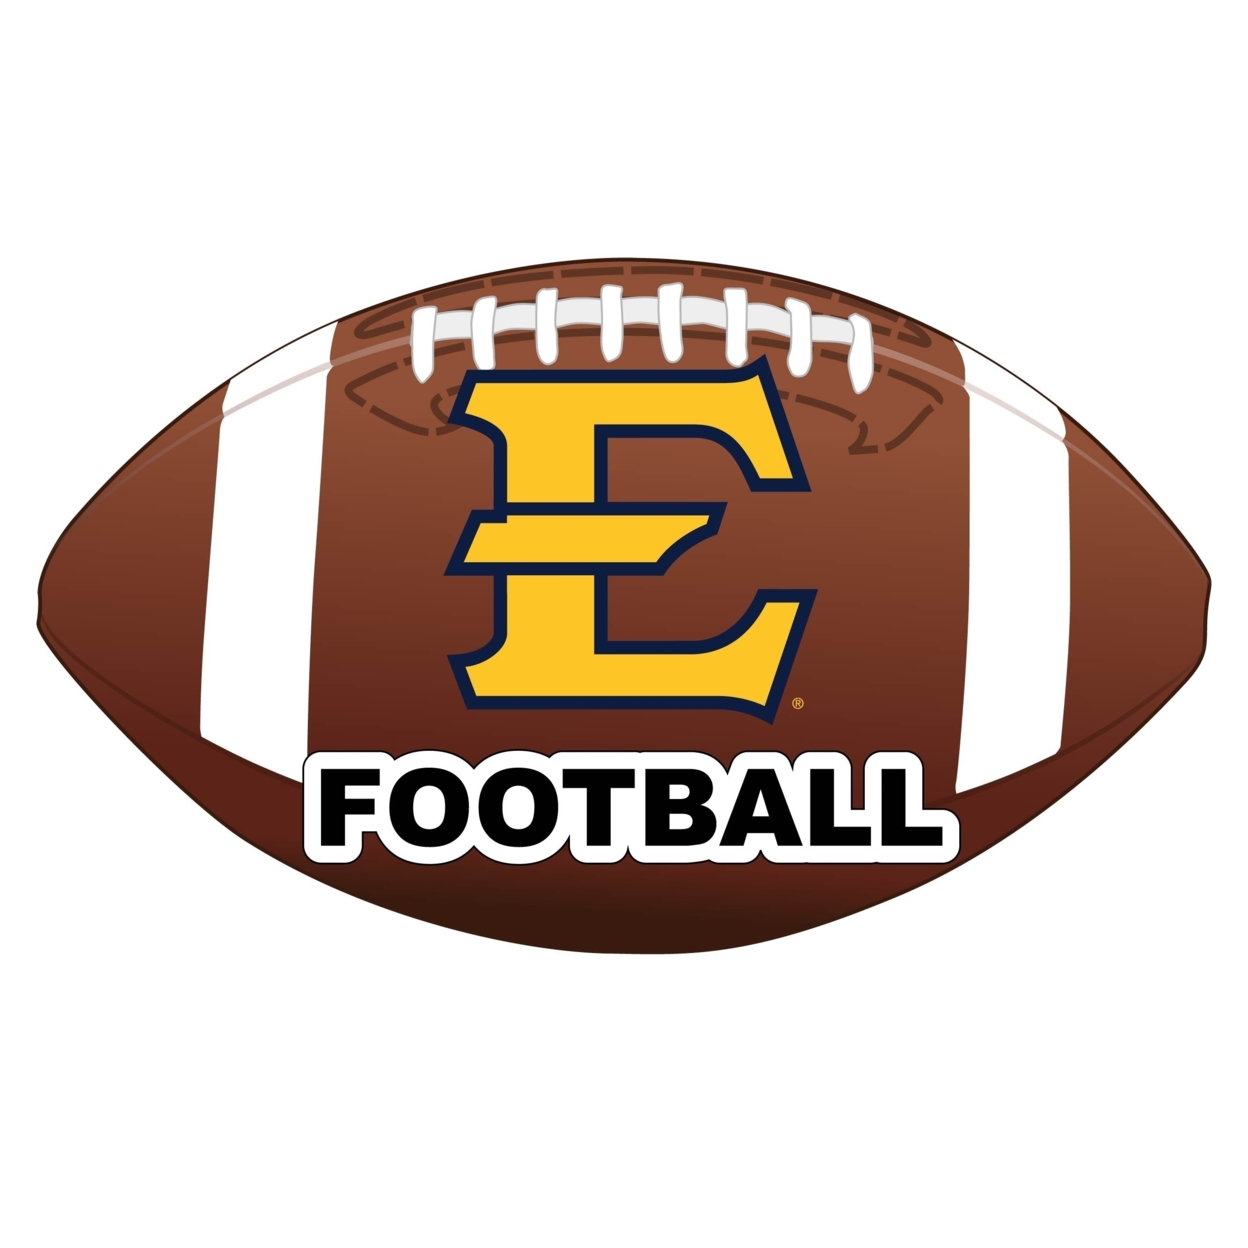 East Tennessee State University 4-Inch NCAA Football Vinyl Decal Sticker